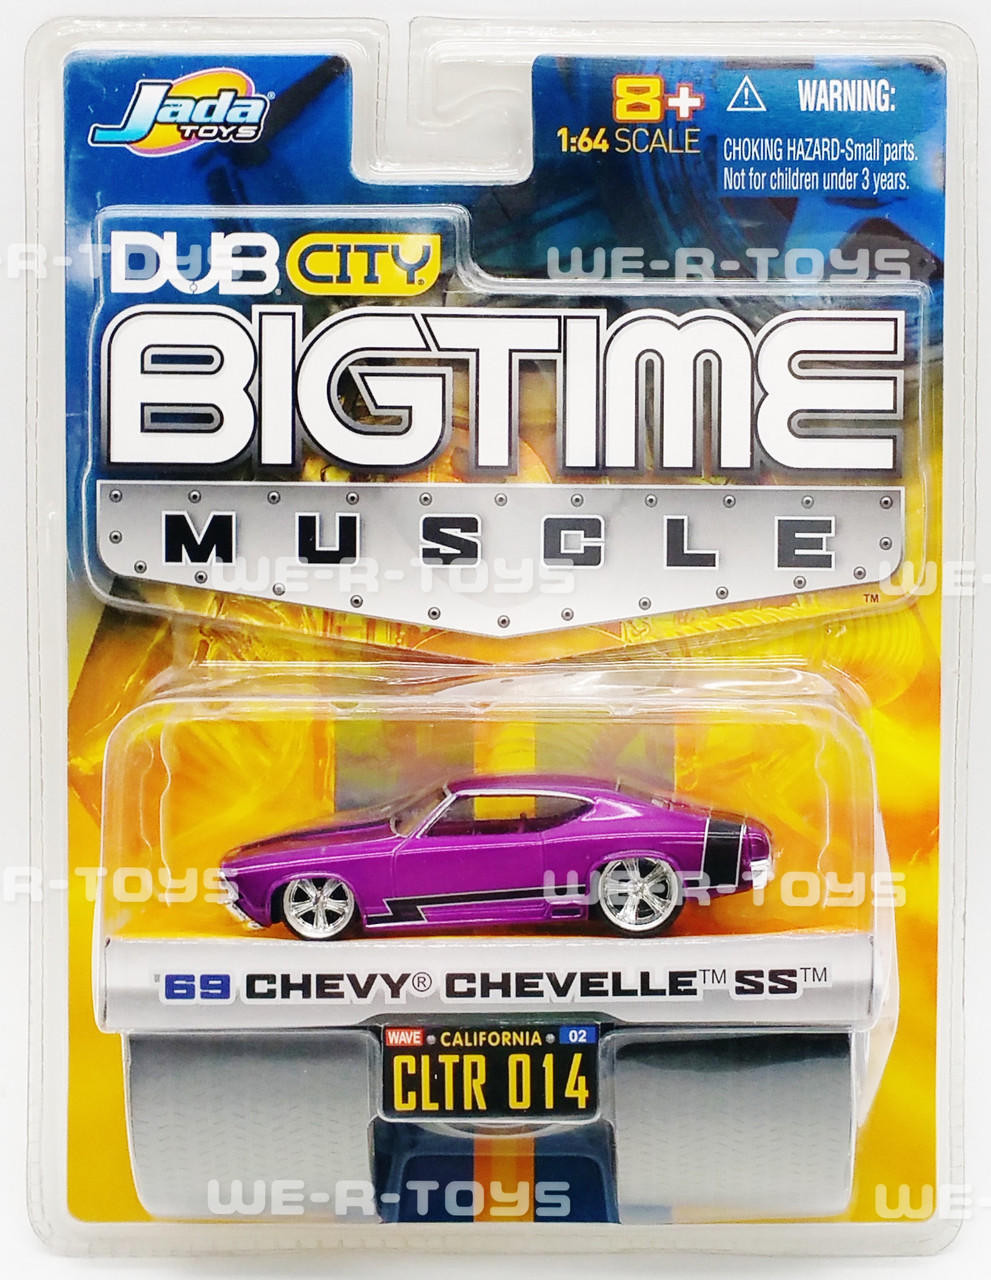 Dub City Bigtime Muscle Purple '69 Chevy Chevelle SS Vehicle Jada